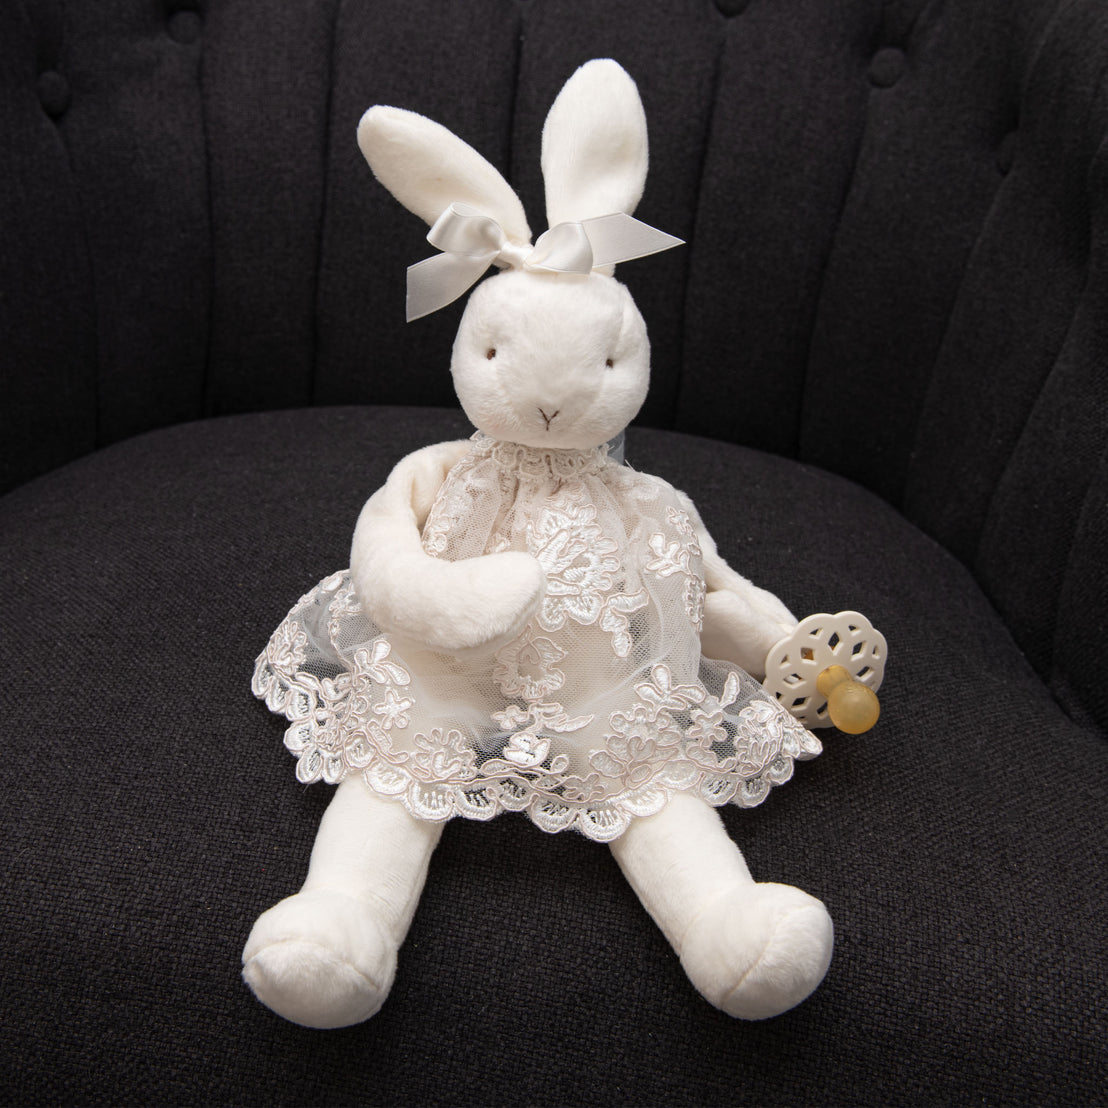 Baby plush bunny toy product photo - wearing a lace christening dress and holding a baby pacifier.